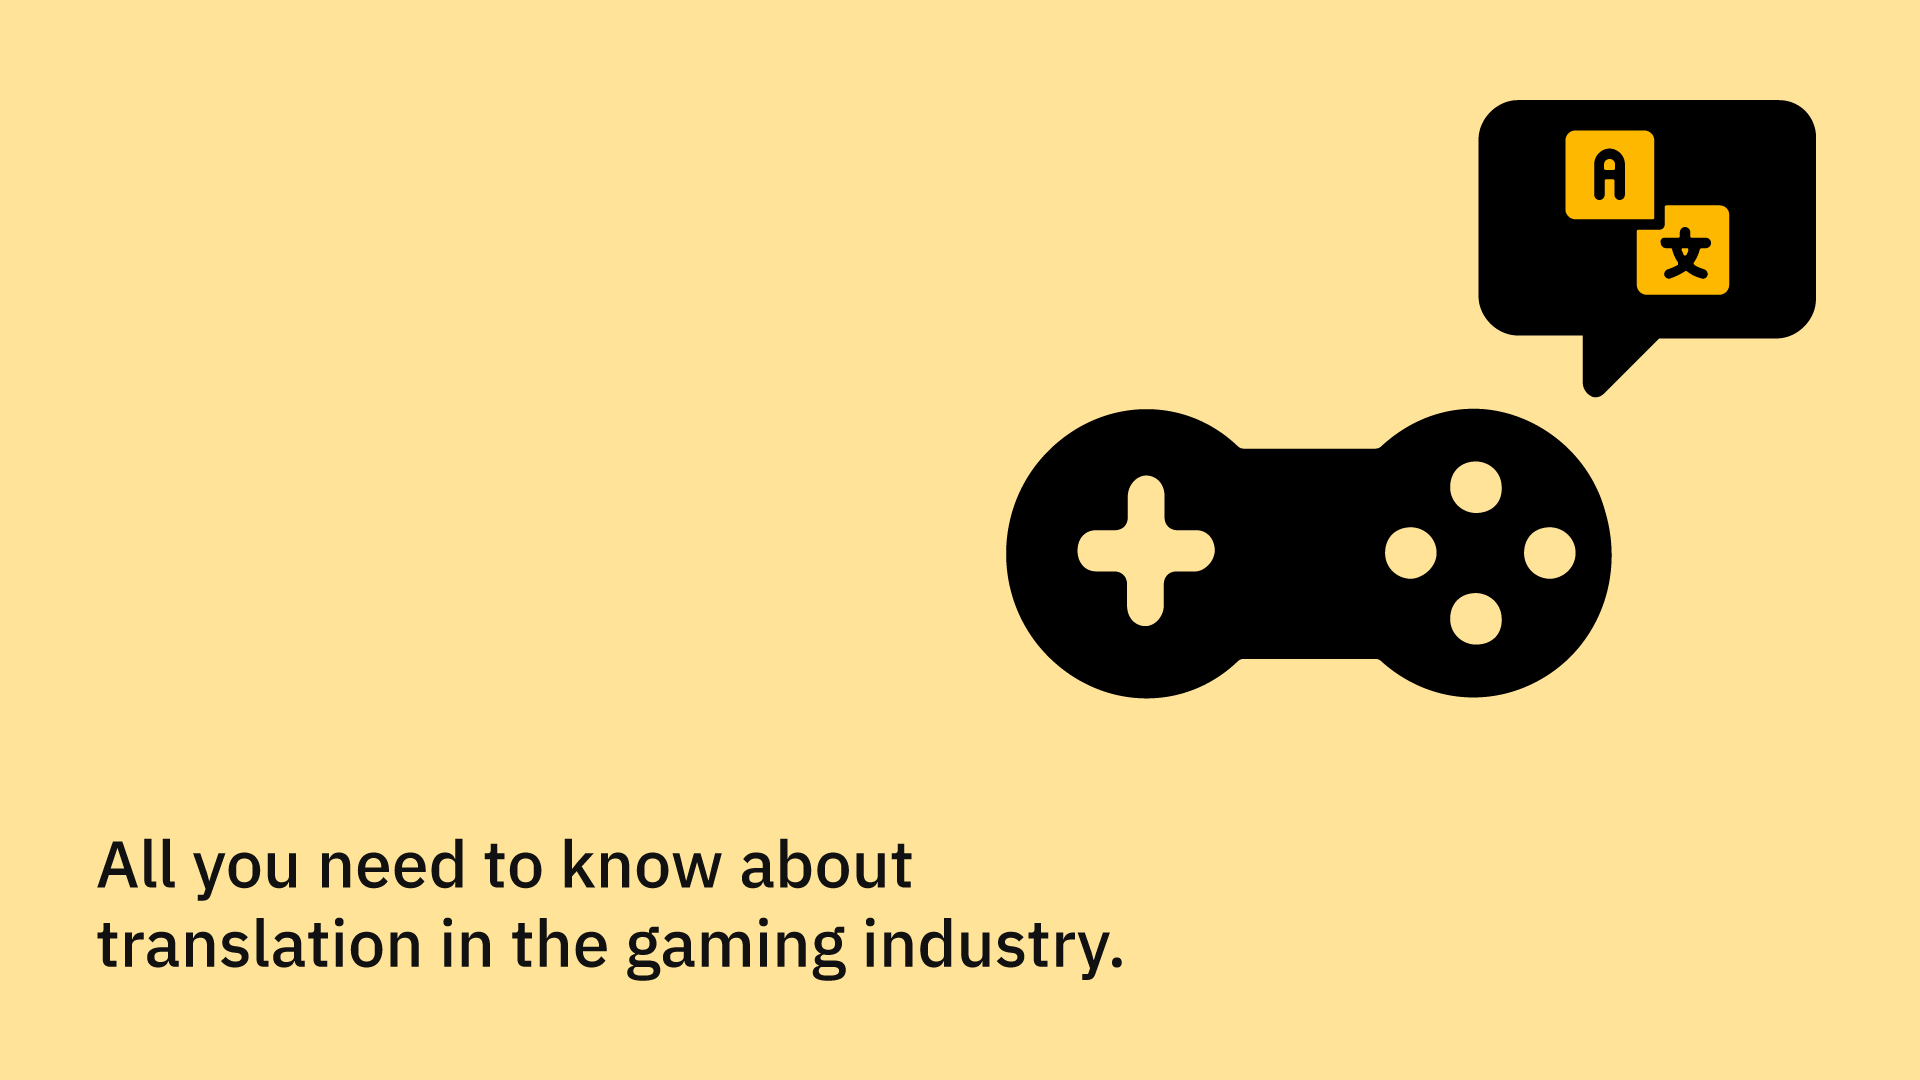 Image showing translation in the gaming industry